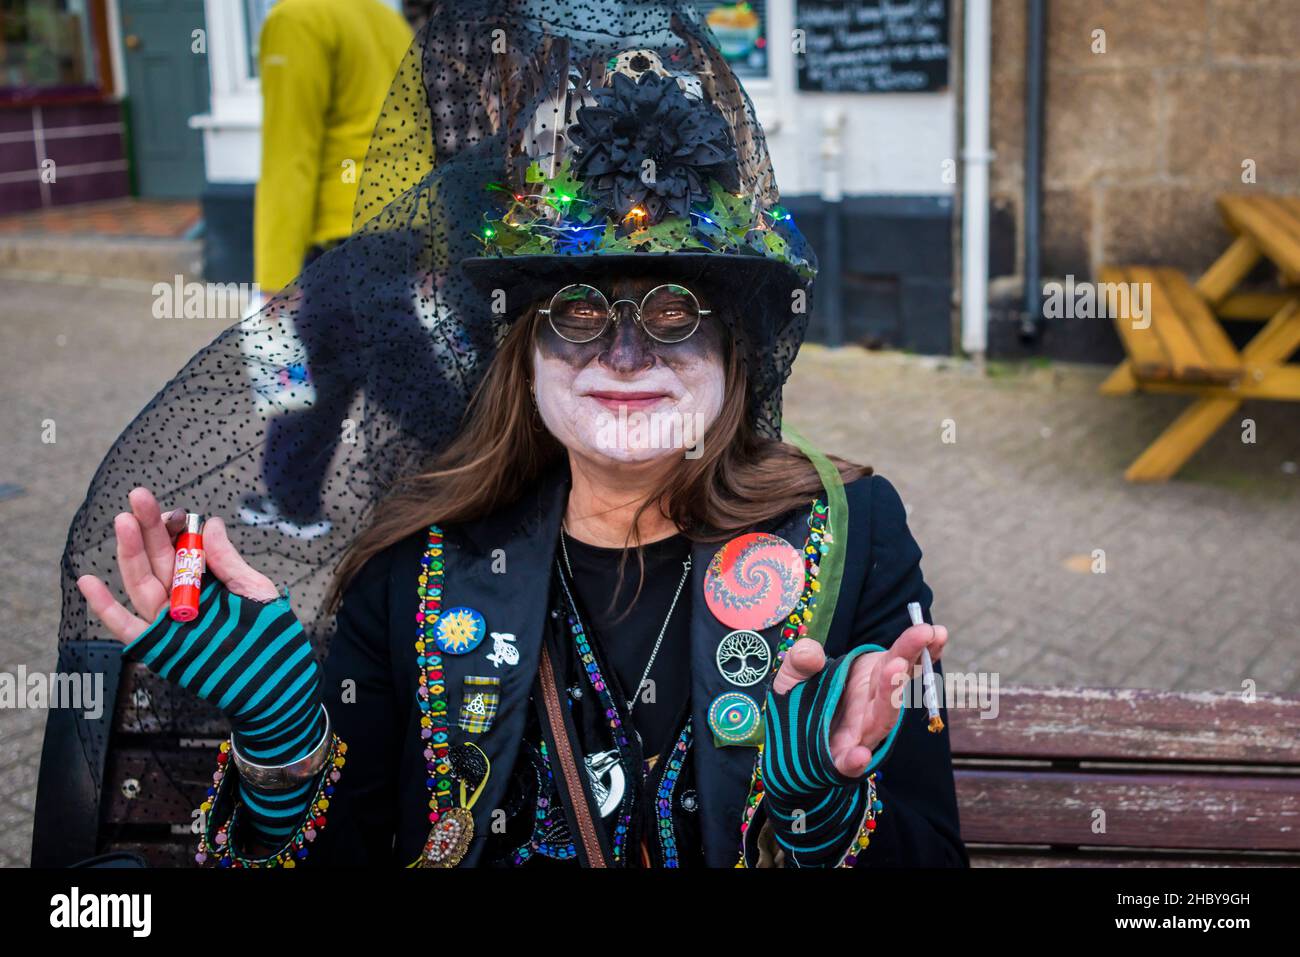 A happy participant in the Montol Festival in Penzance in Cornwall. The festival is a revival or reinterpretation of many of the traditional Cornish m Stock Photo